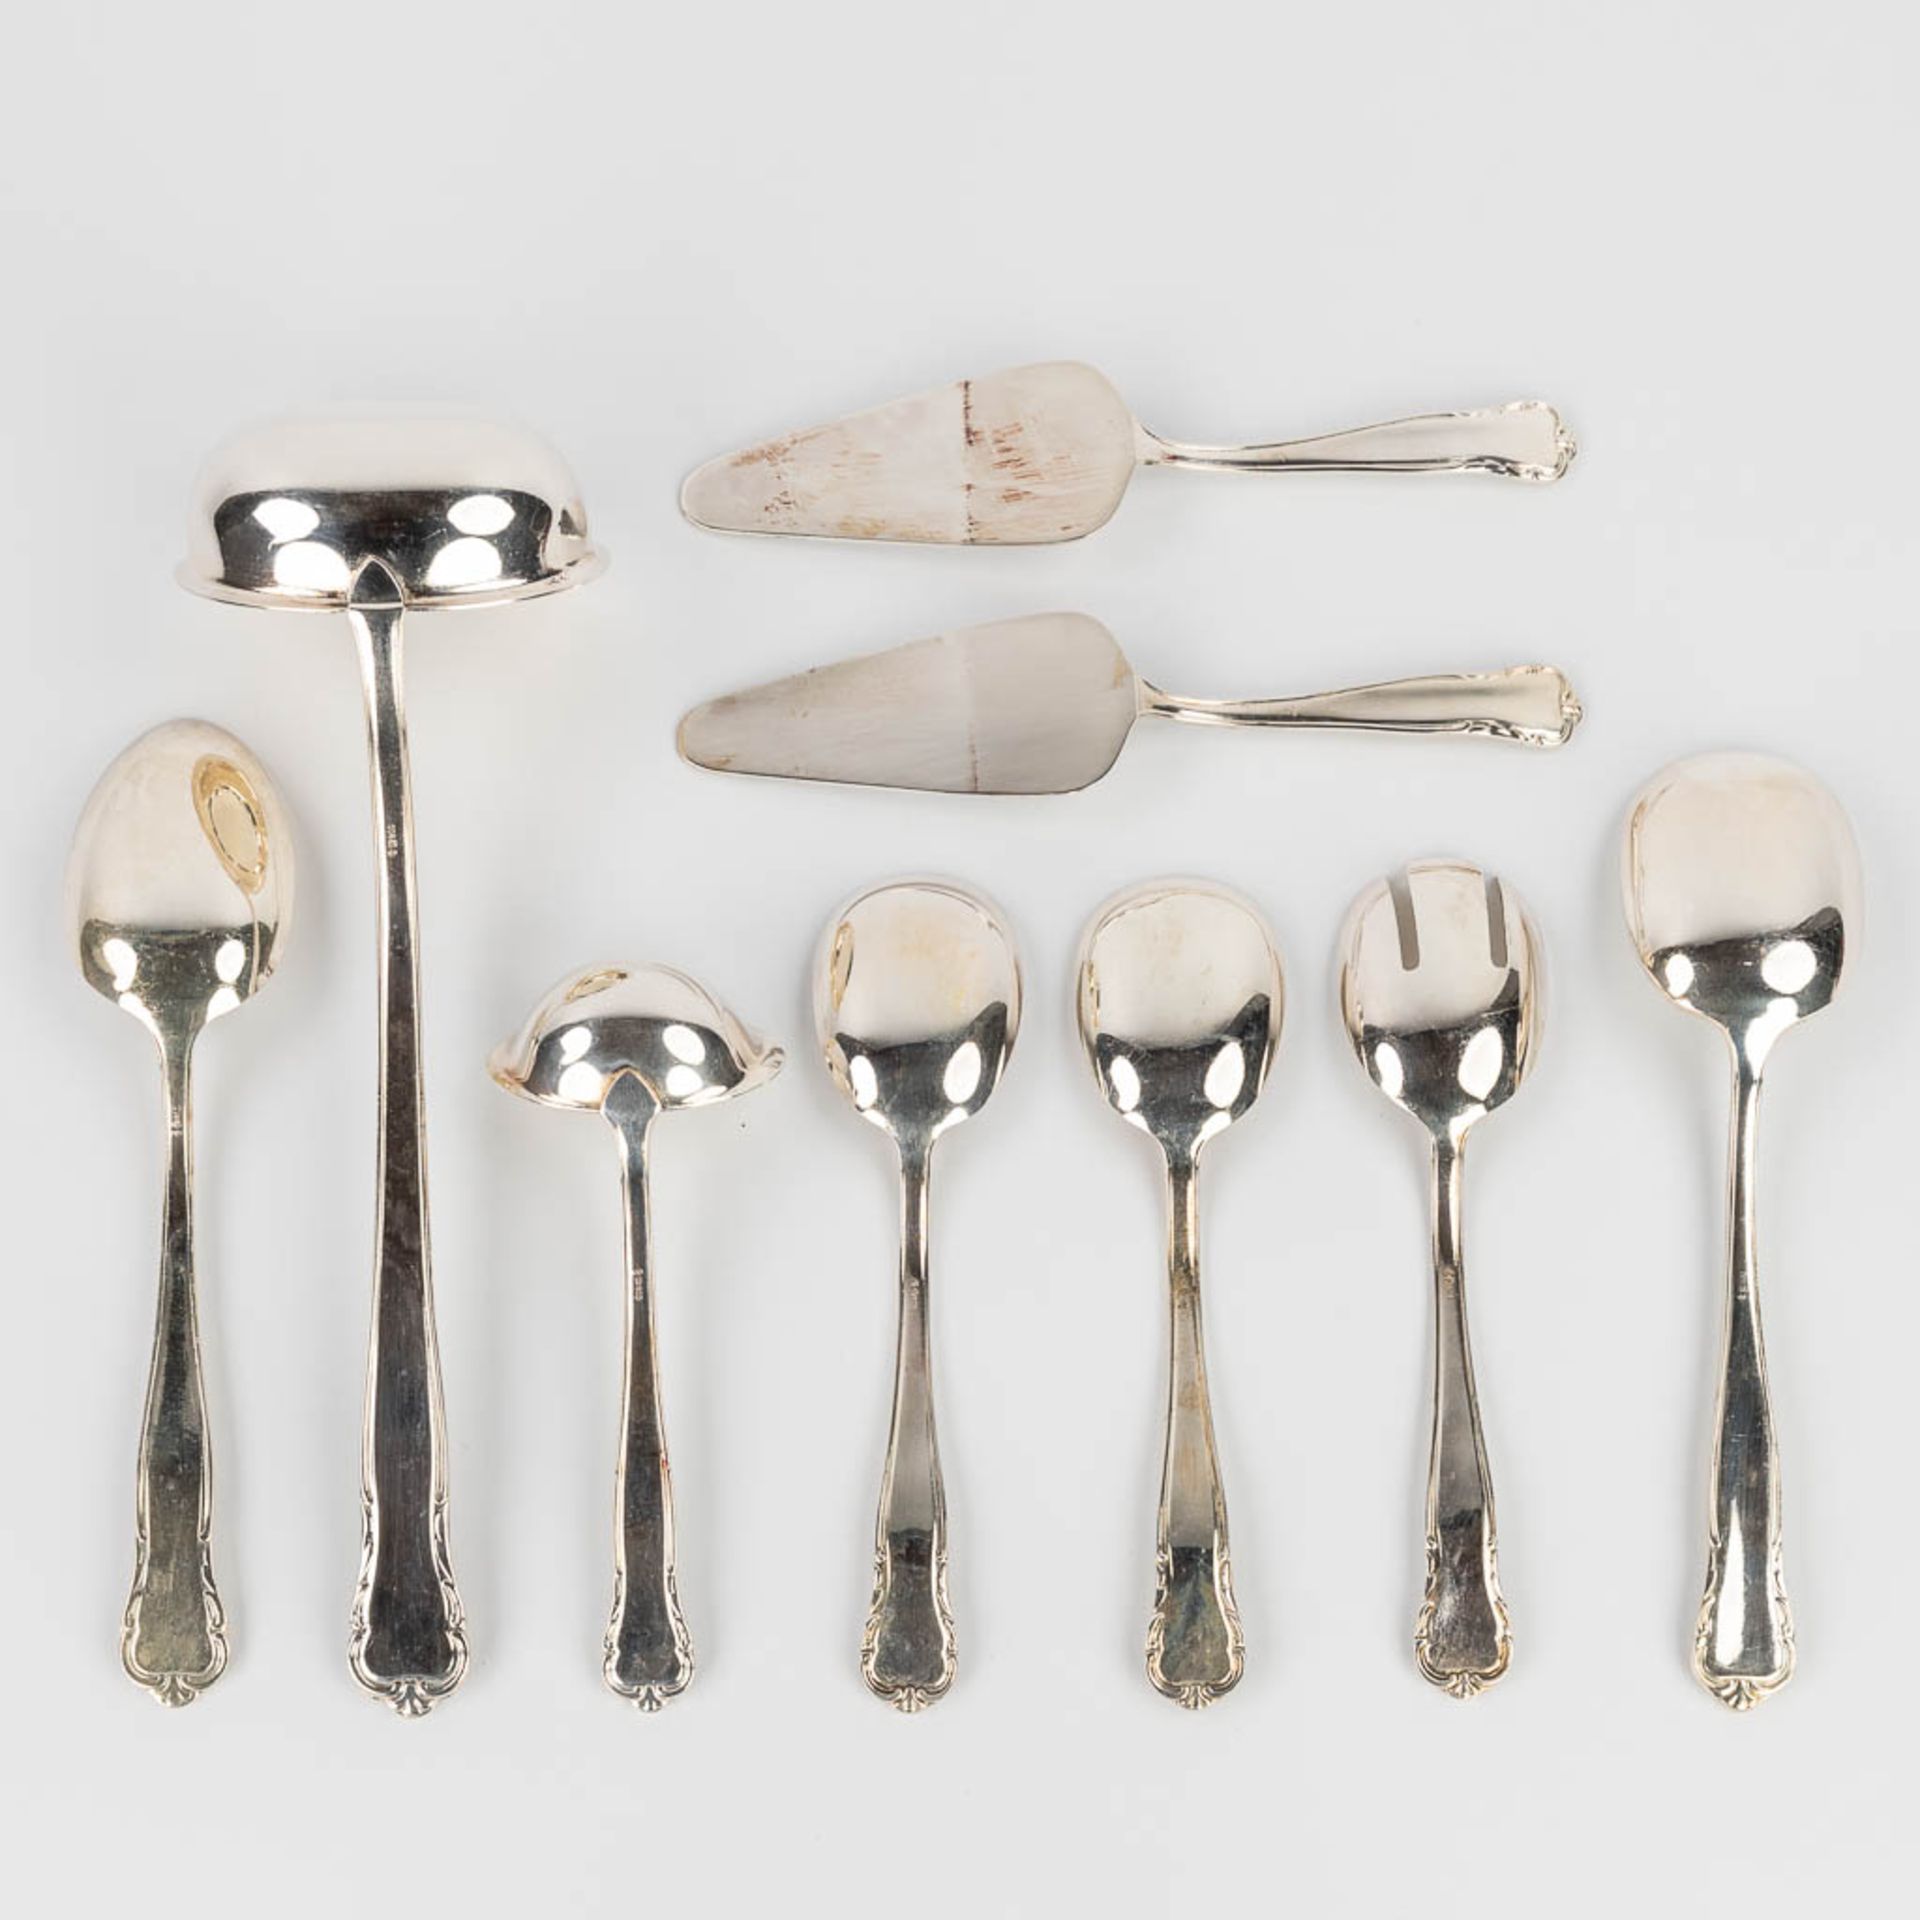 A 148-piece silver cutlery set in a chest, made in Germany. 6585g. (L:34 x W:46 x H:31 cm) - Image 10 of 12